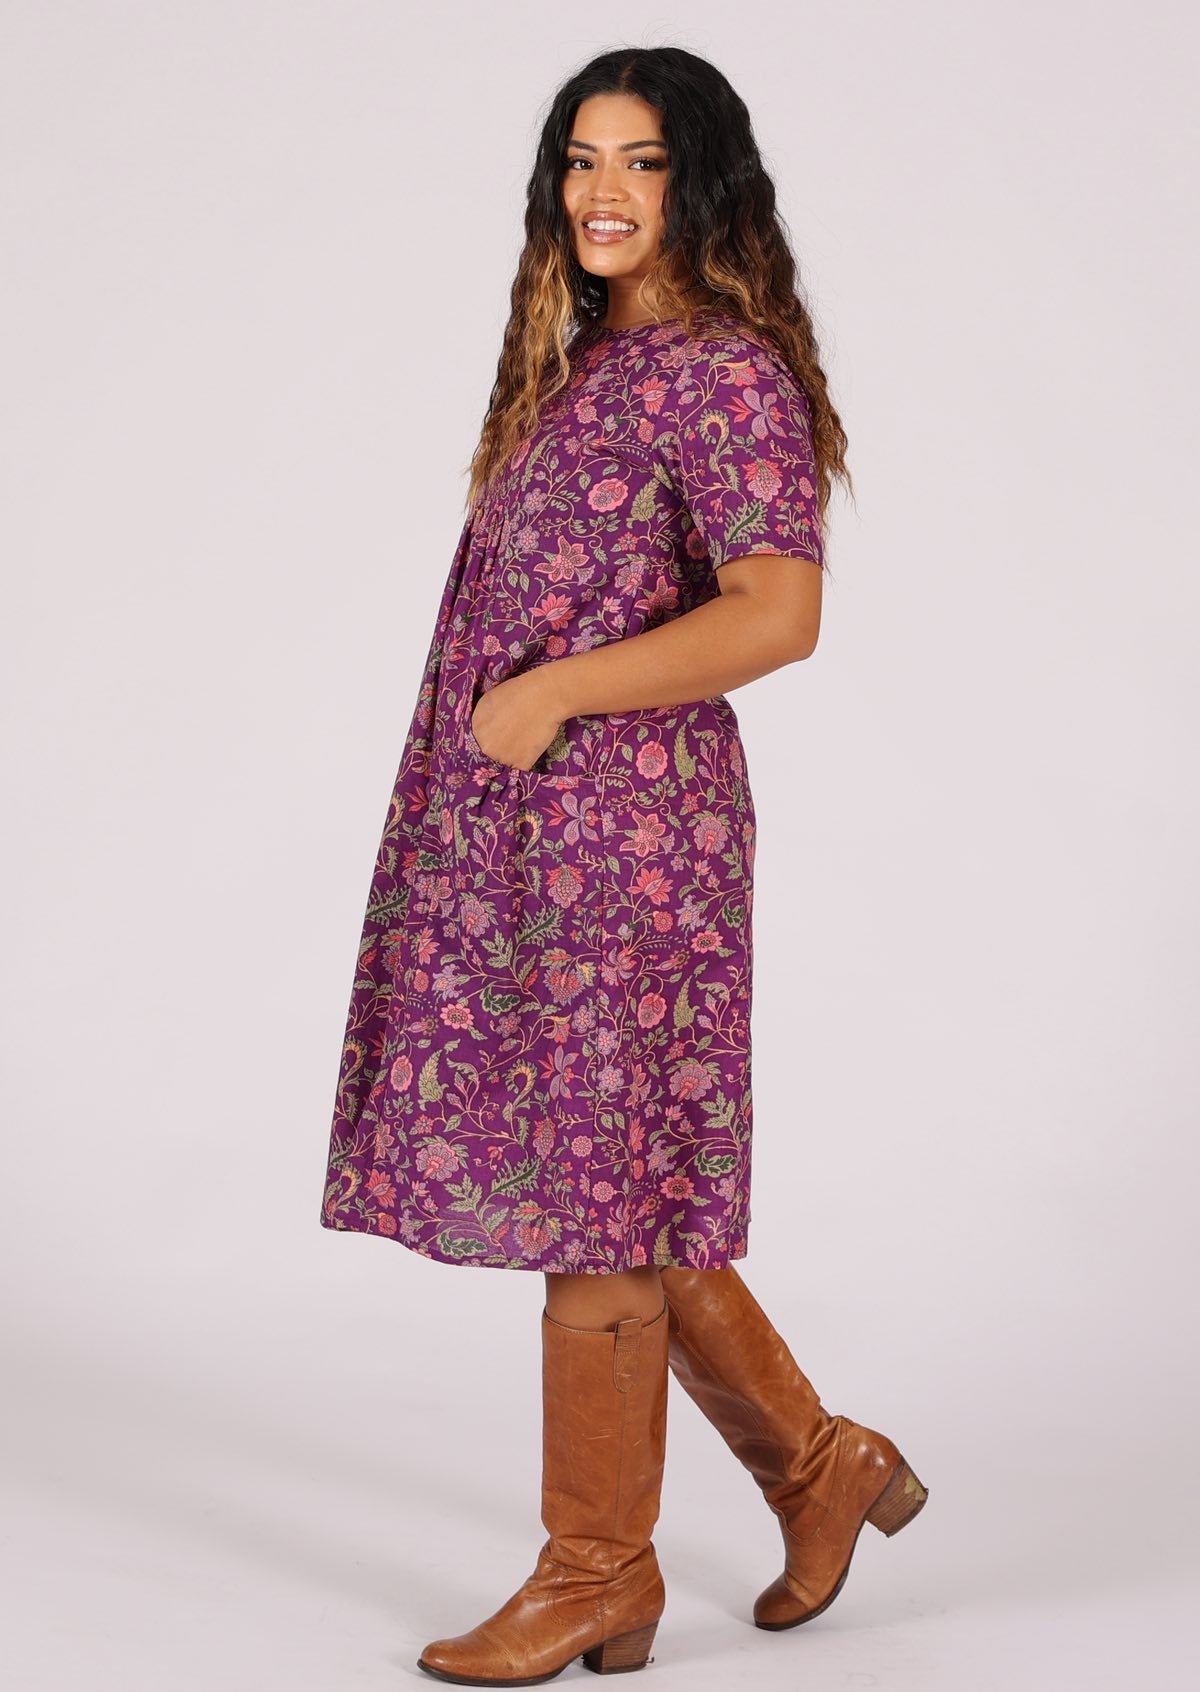 Cotton dress with empire waistline with gathers under the bodice and pockets